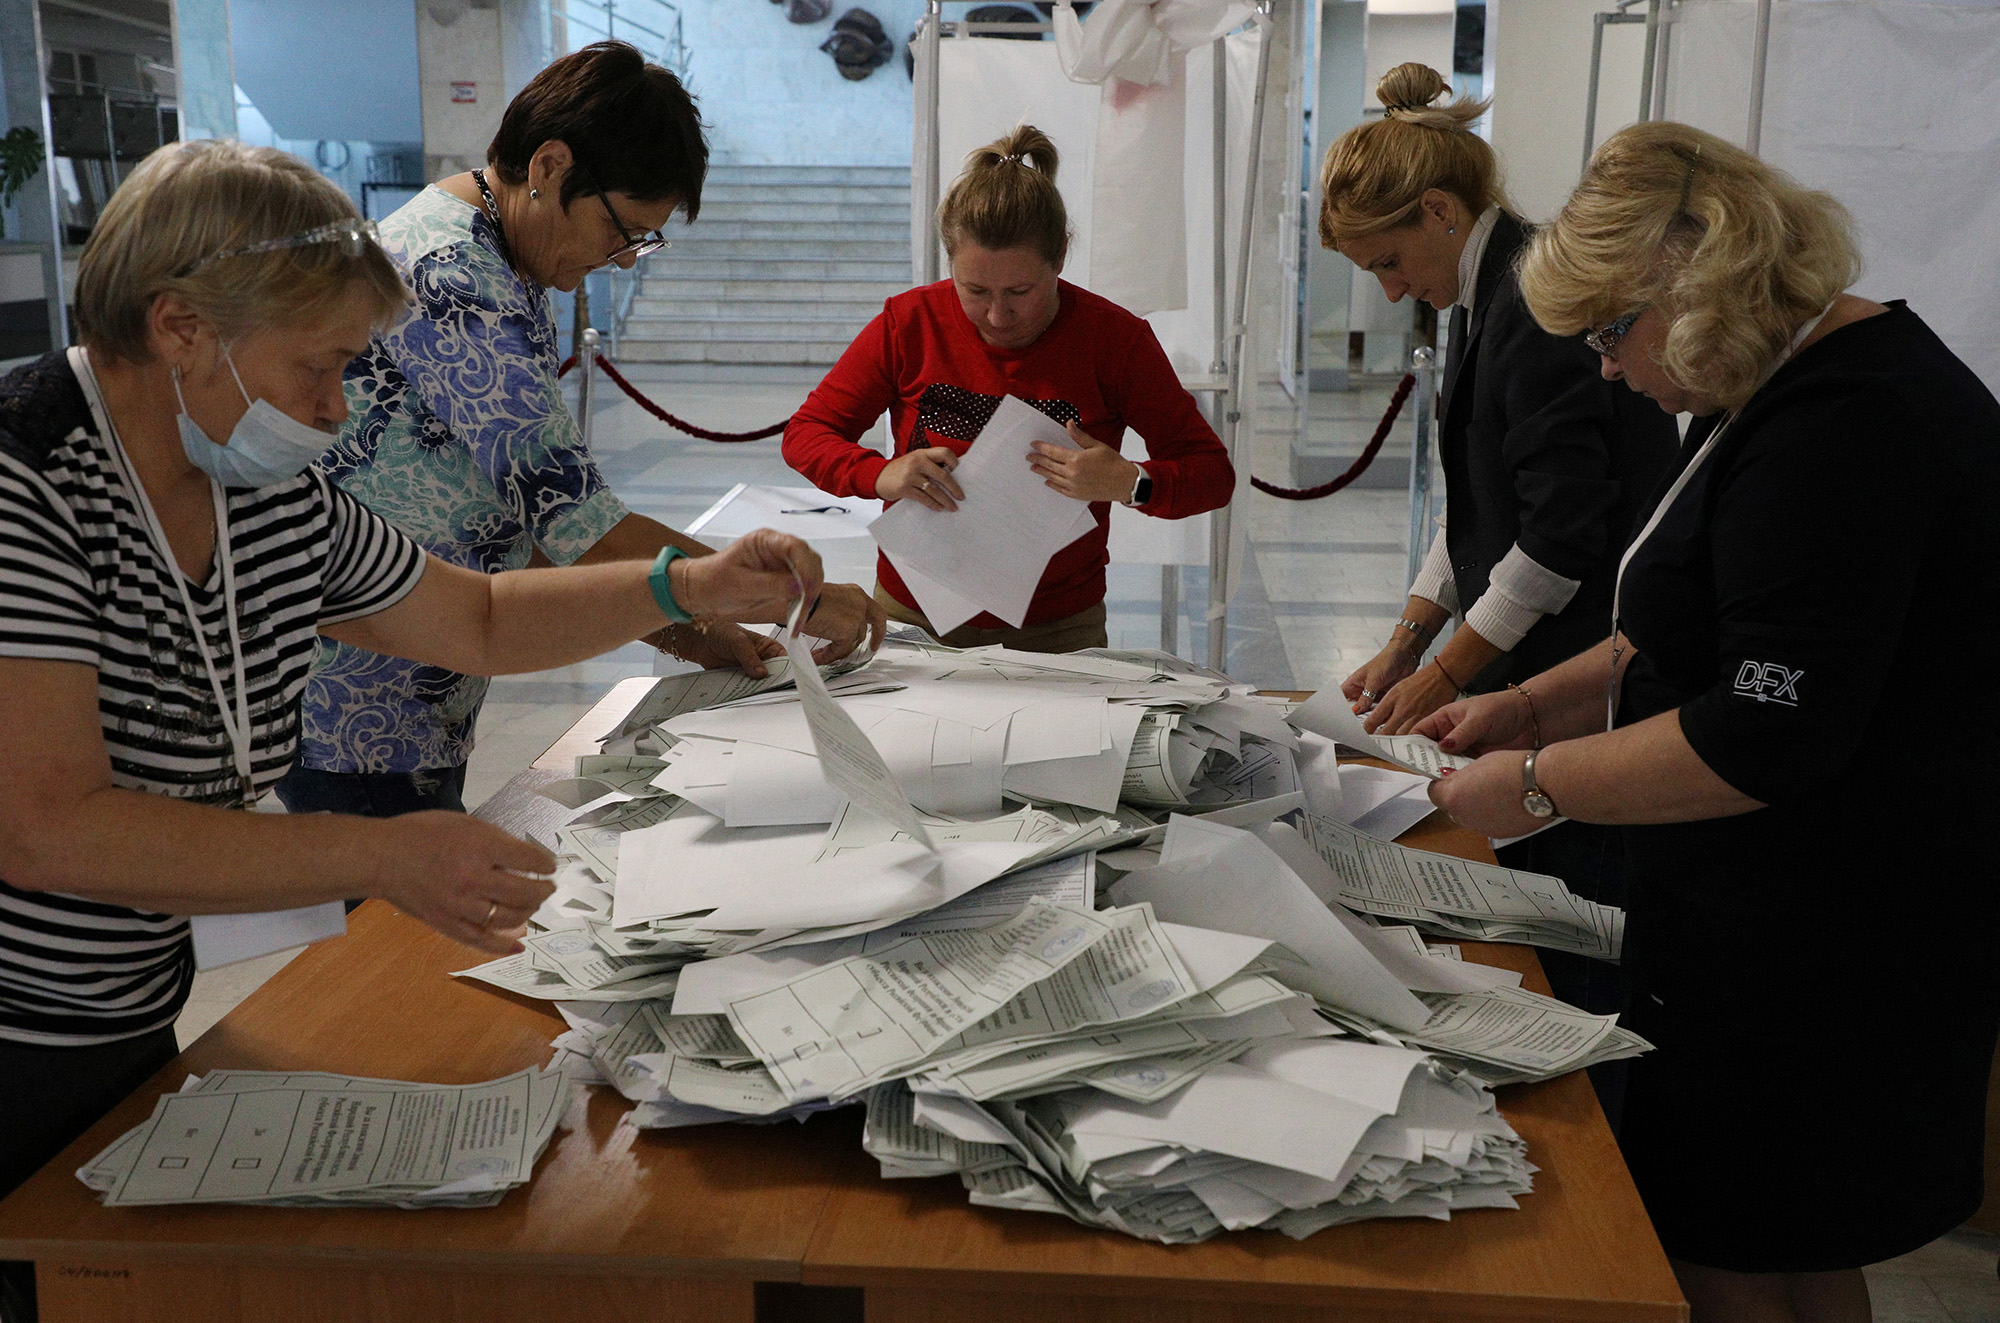 Members of a local electoral commission count ballots at a polling station following a referendum on the joining of Russian-controlled regions of Ukraine to Russia, in Sevastopol, Crimea, on September 27.